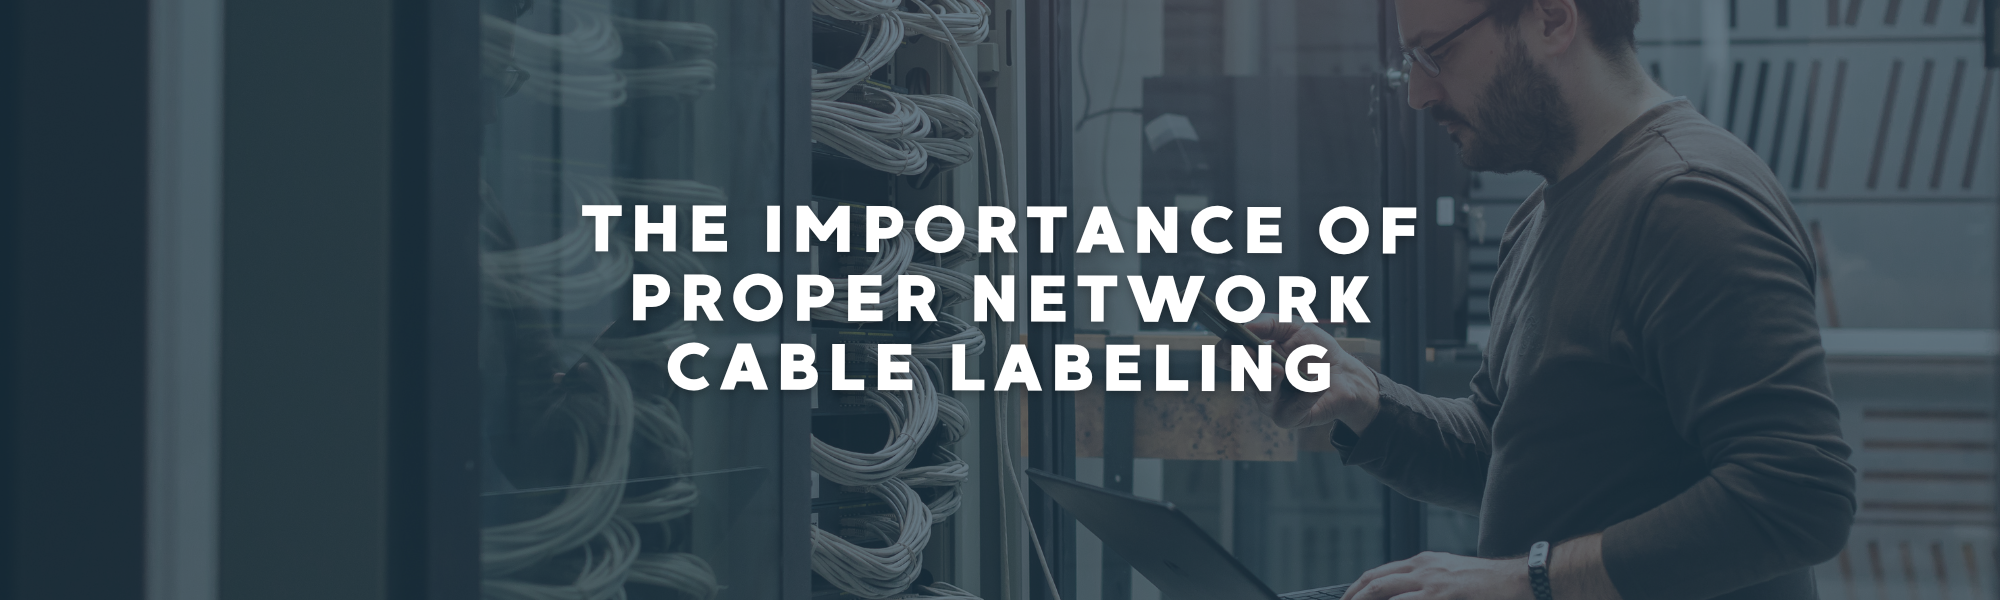 The Importance of Proper Network Cable Labeling: Enhancing System Maintenance, Safety, and Reliability